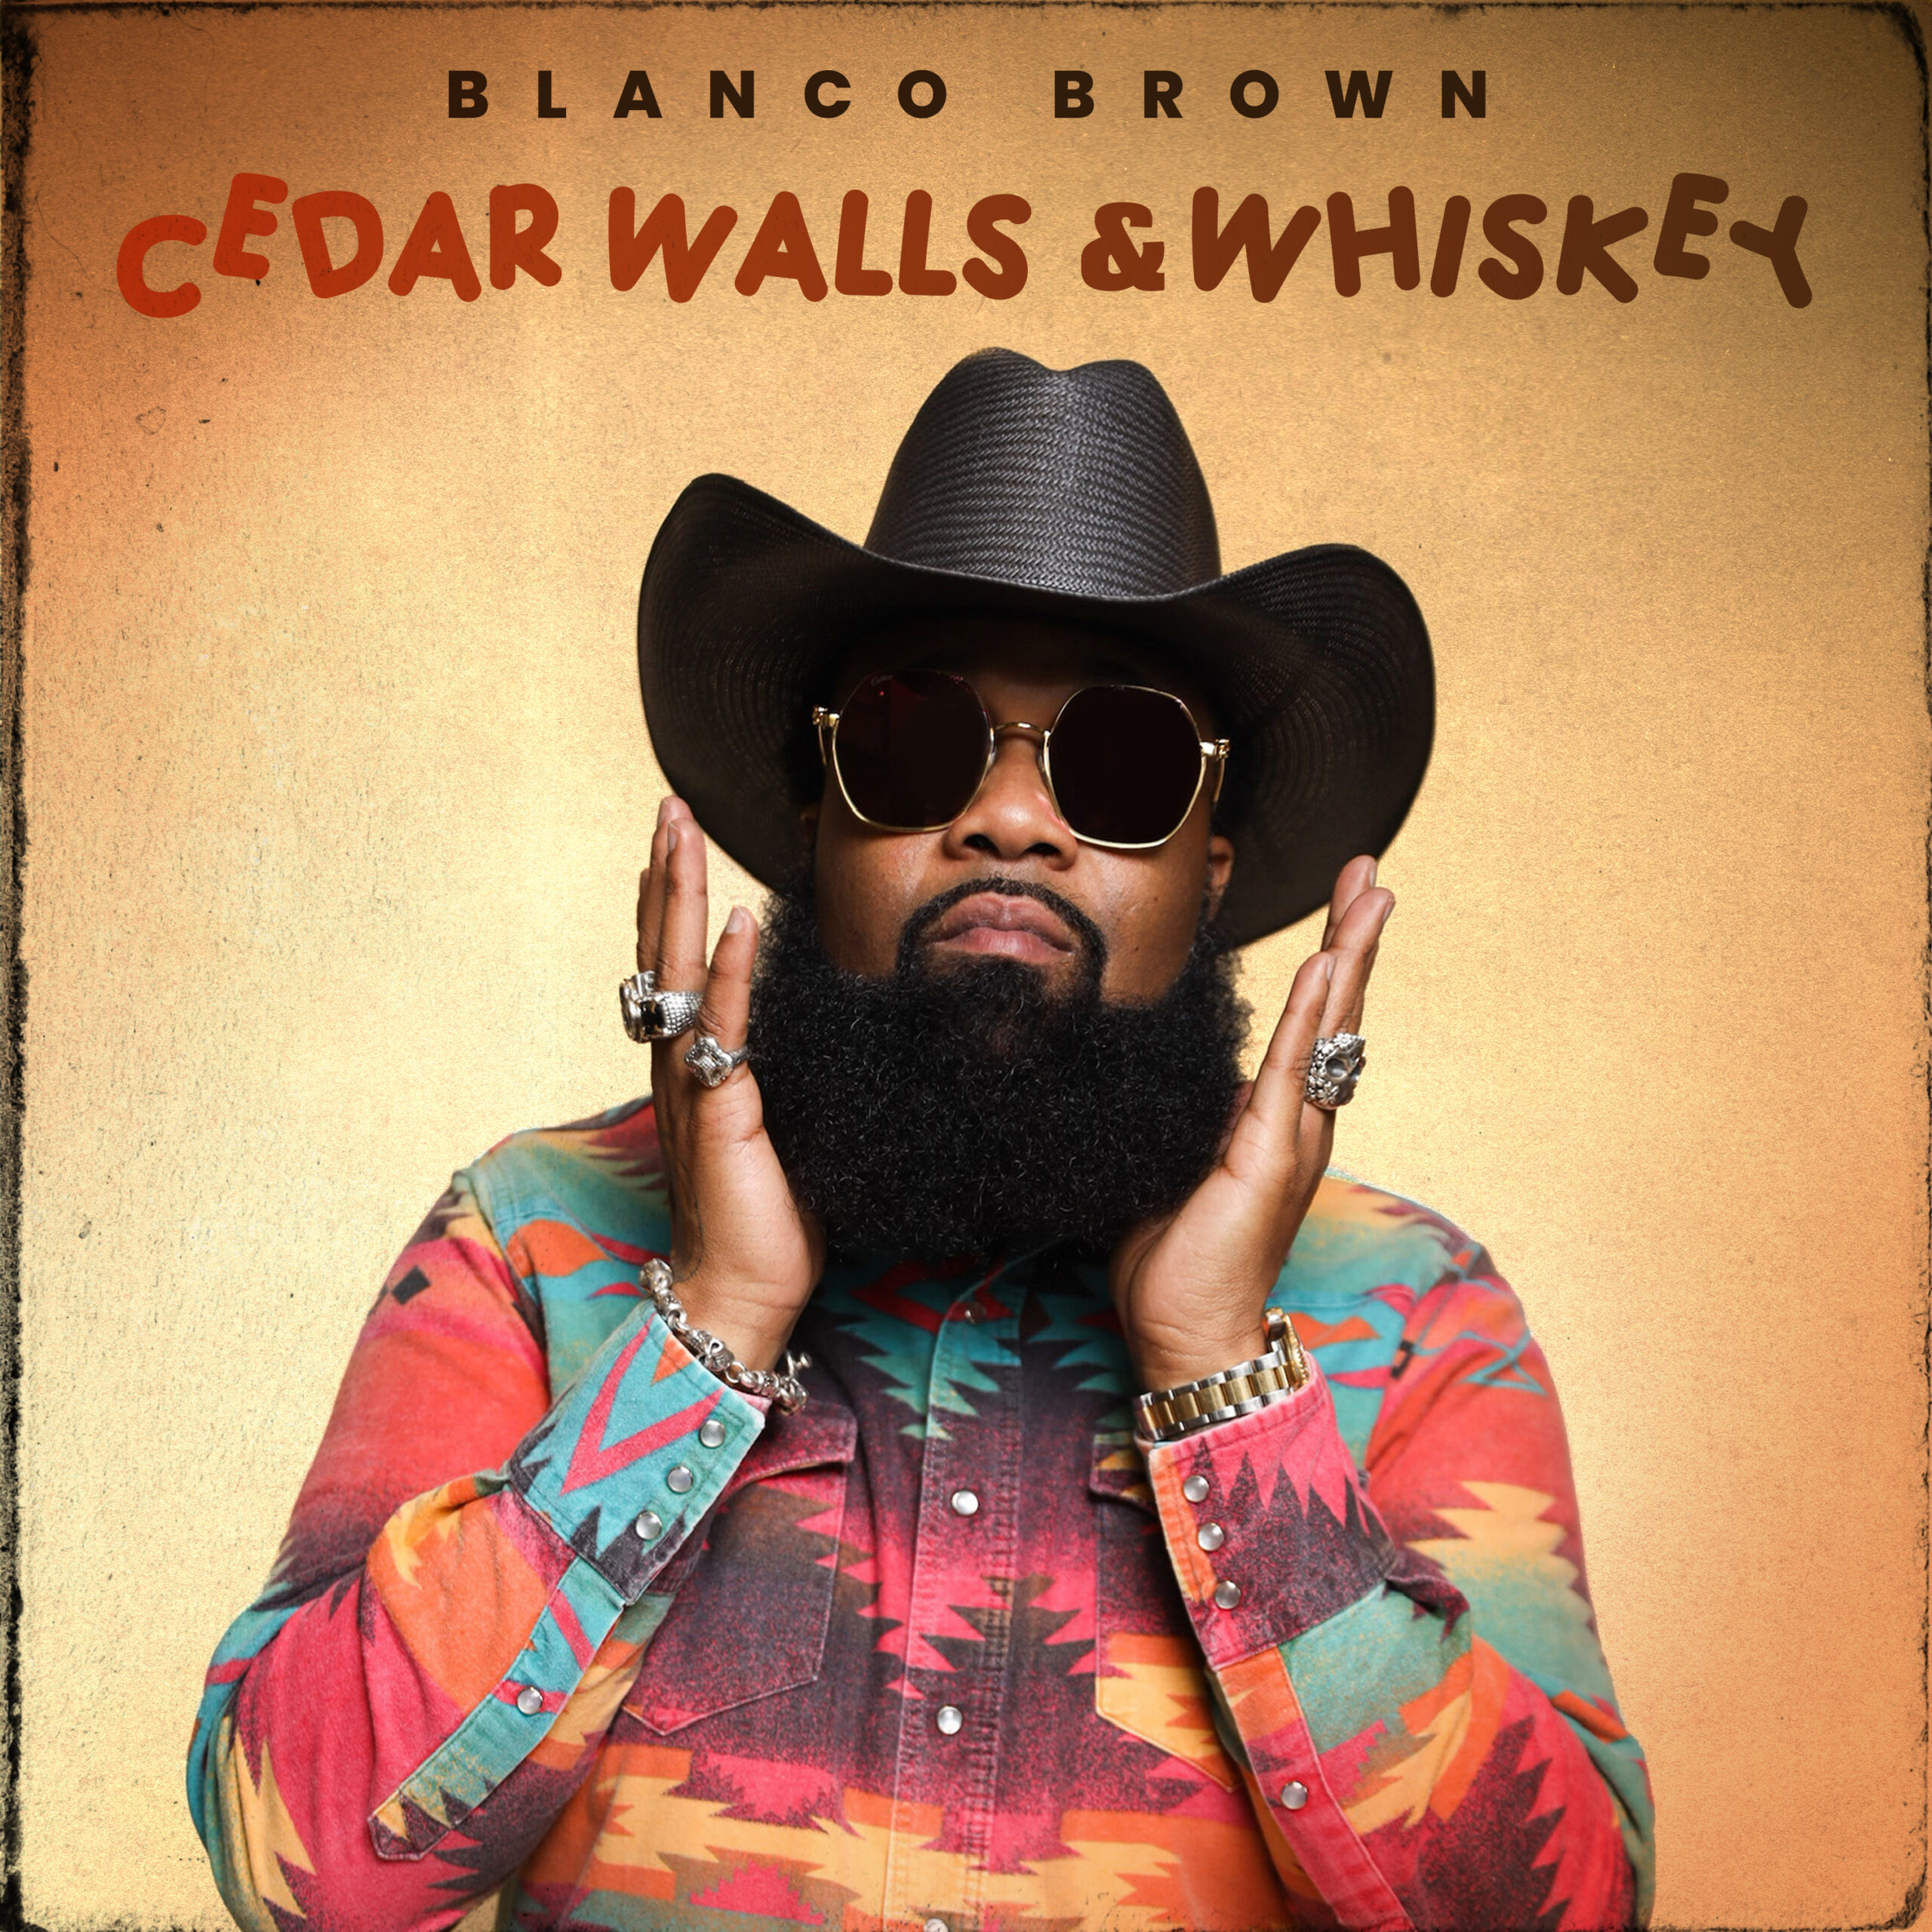 BLANCO BROWN RELEASES SECOND EP, CEDAR WALLS & WHISKEY 